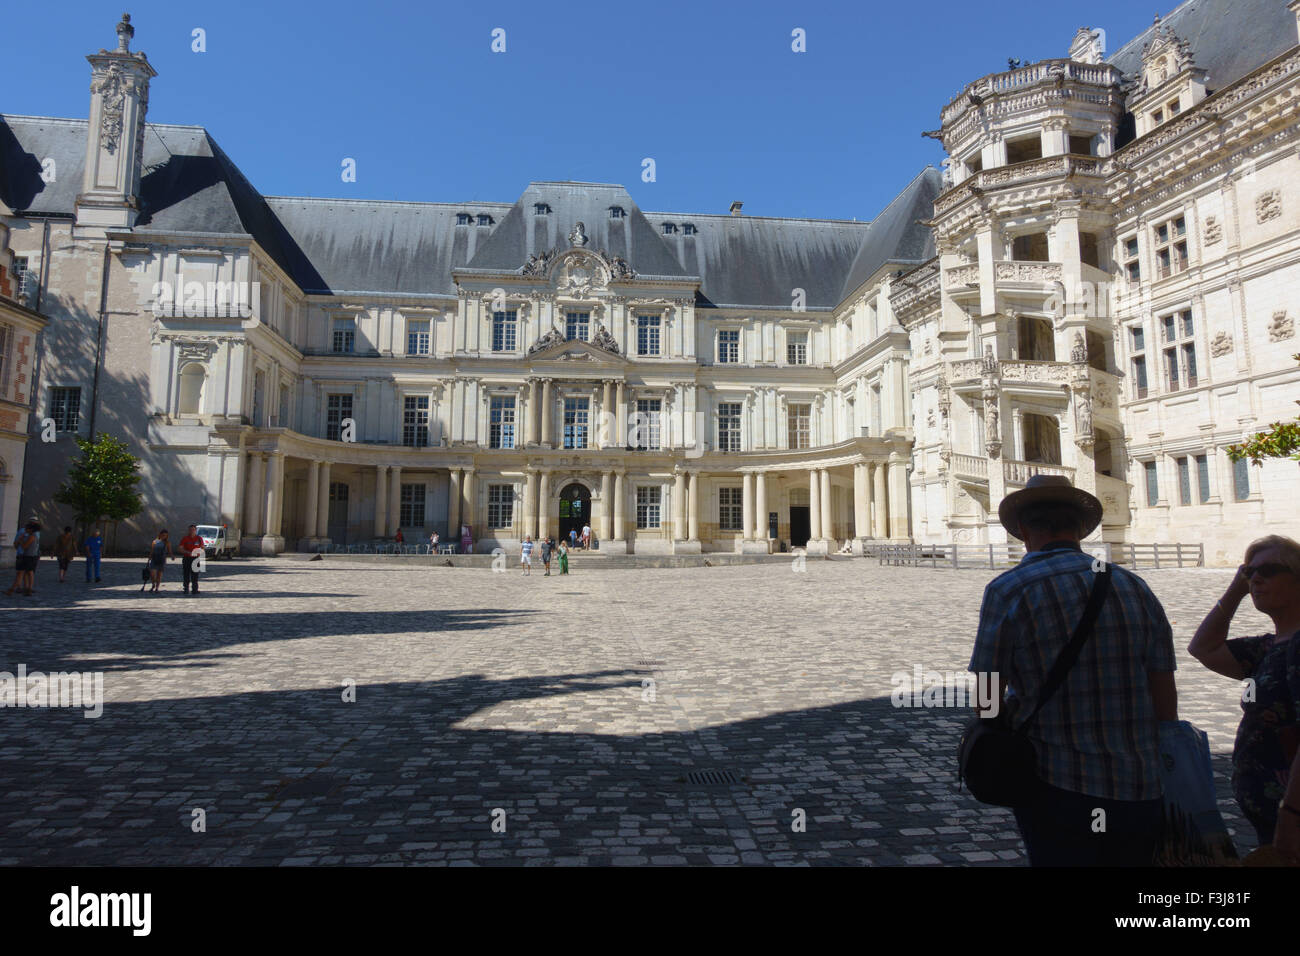 Courtyard of the Royal Chateau of Blois in the Loire Valley, France Stock Photo